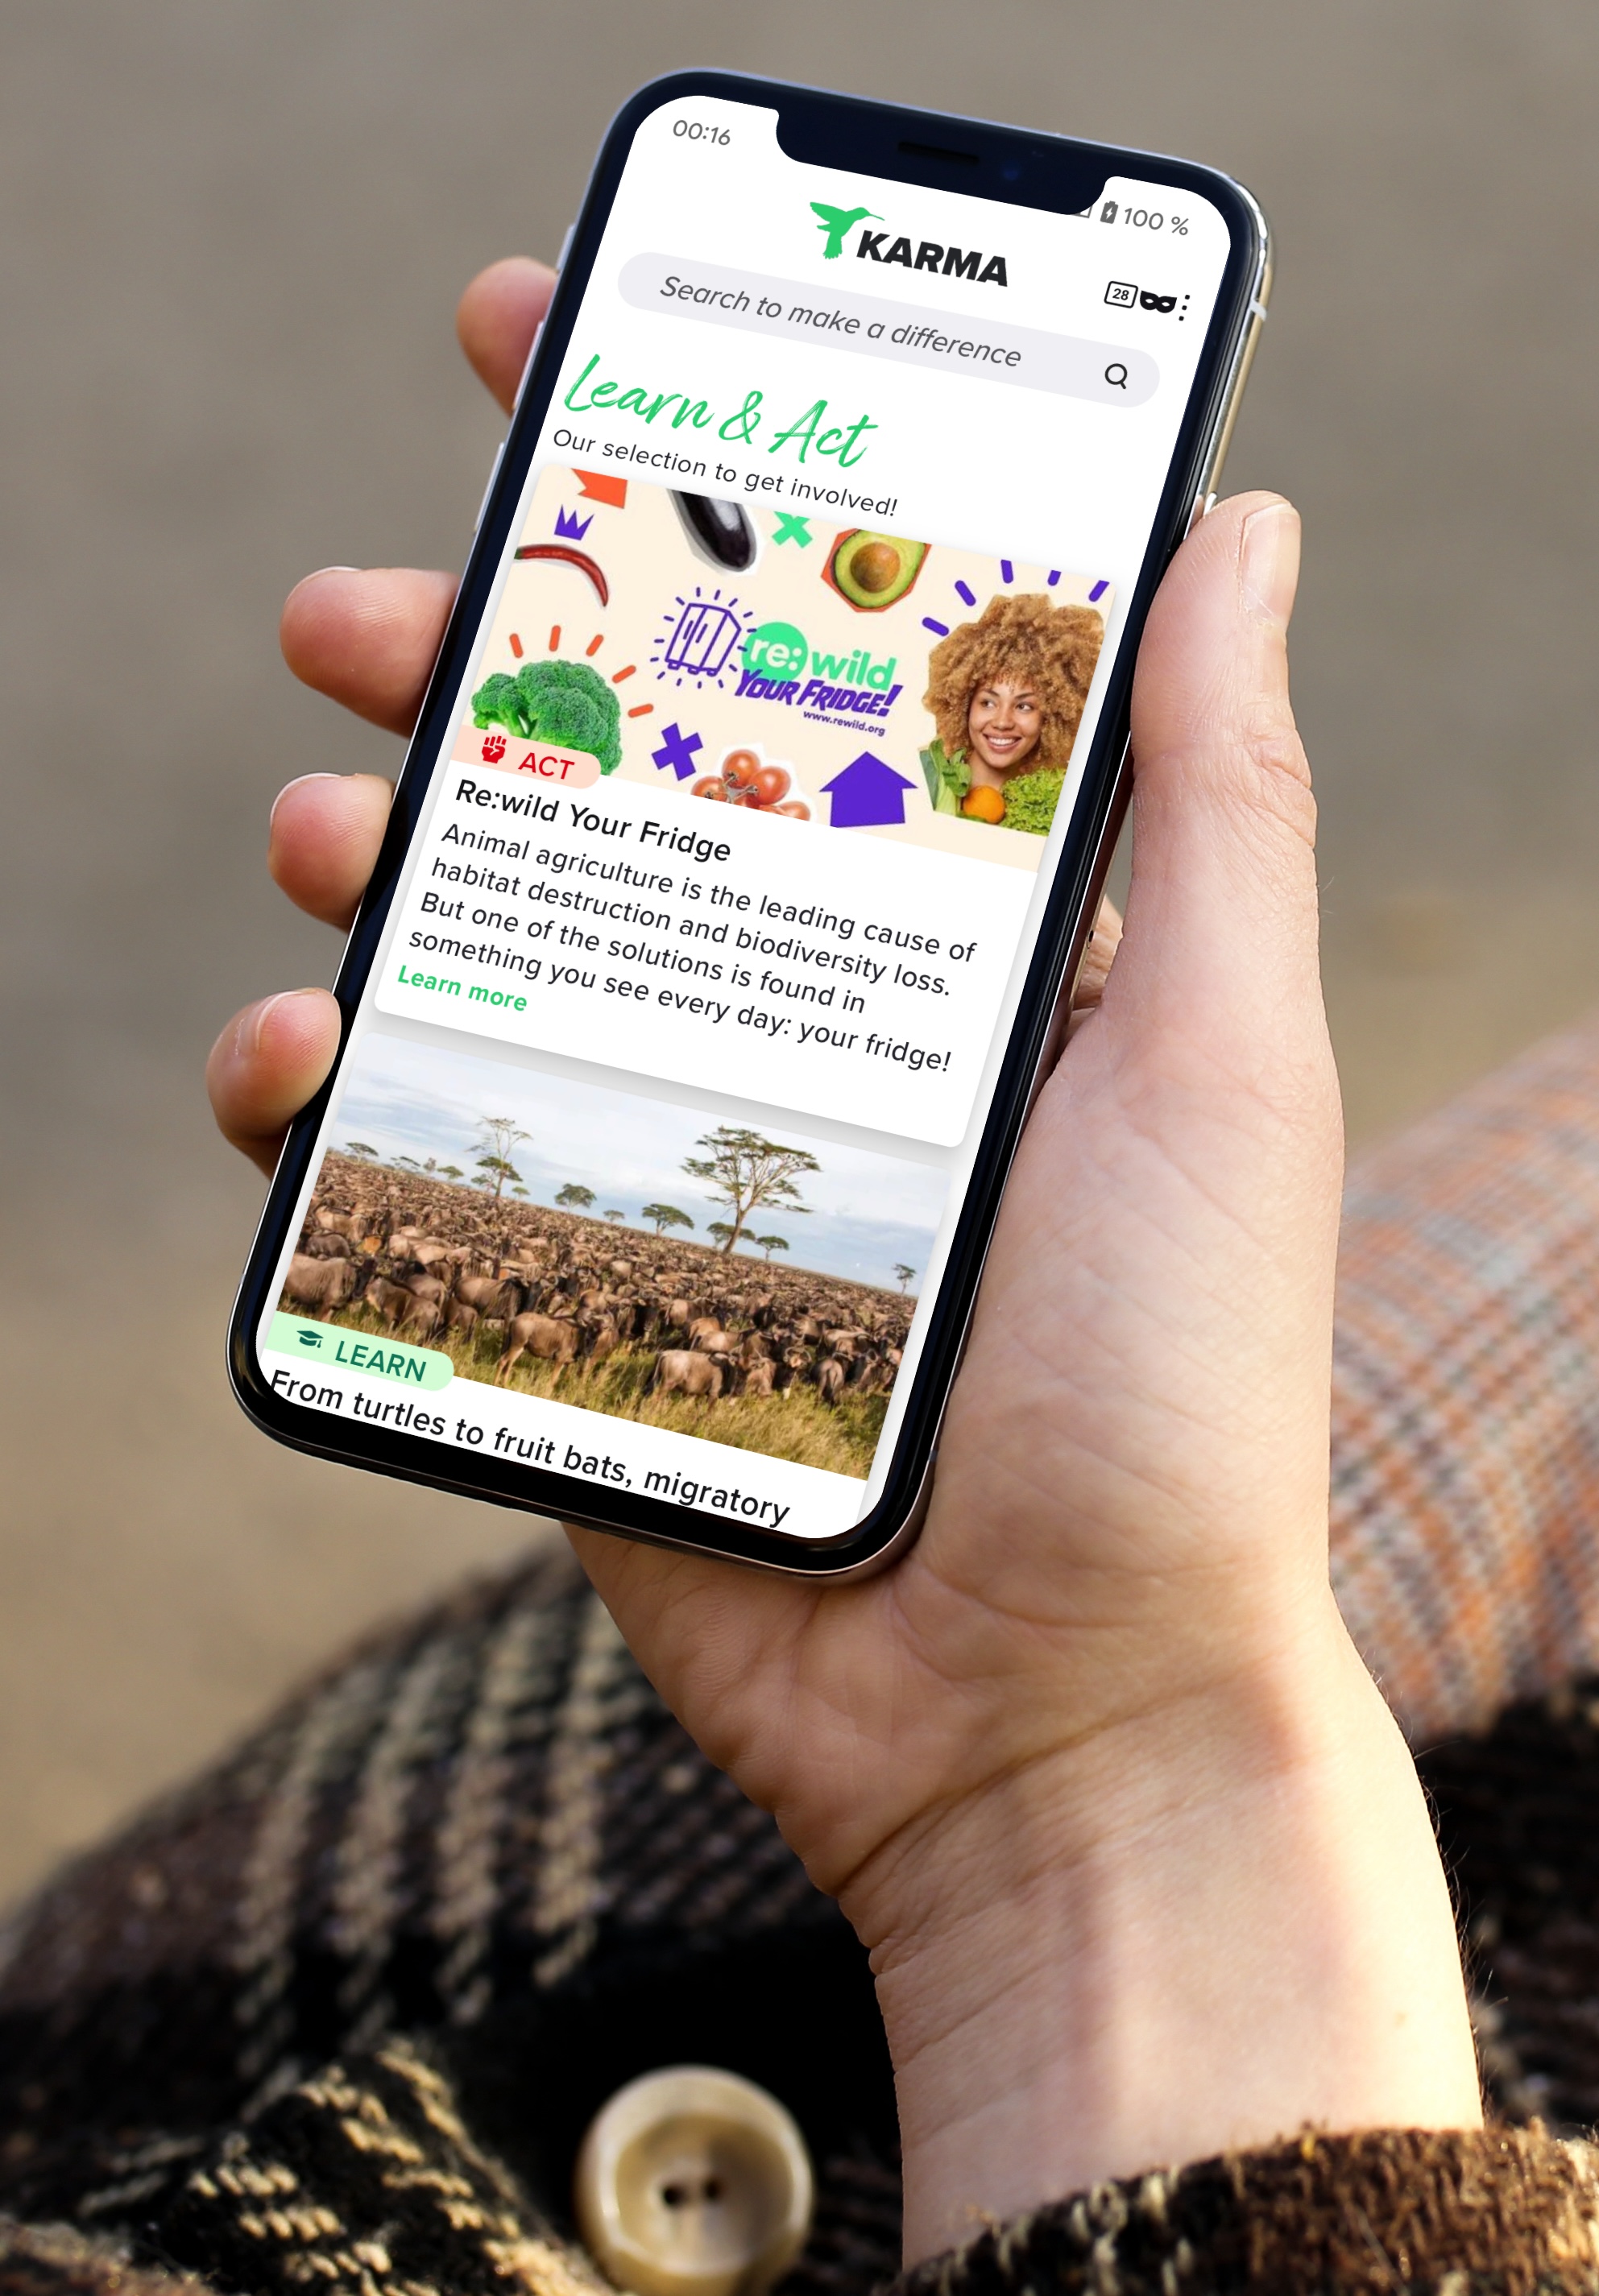 ETHICAL SEARCH ENGINE KARMA ARRIVES IN THE U.S.; EMPOWERS USERS TO PROTECT ANIMALS AND BIODIVERSITY BY BROWSING THE WEB